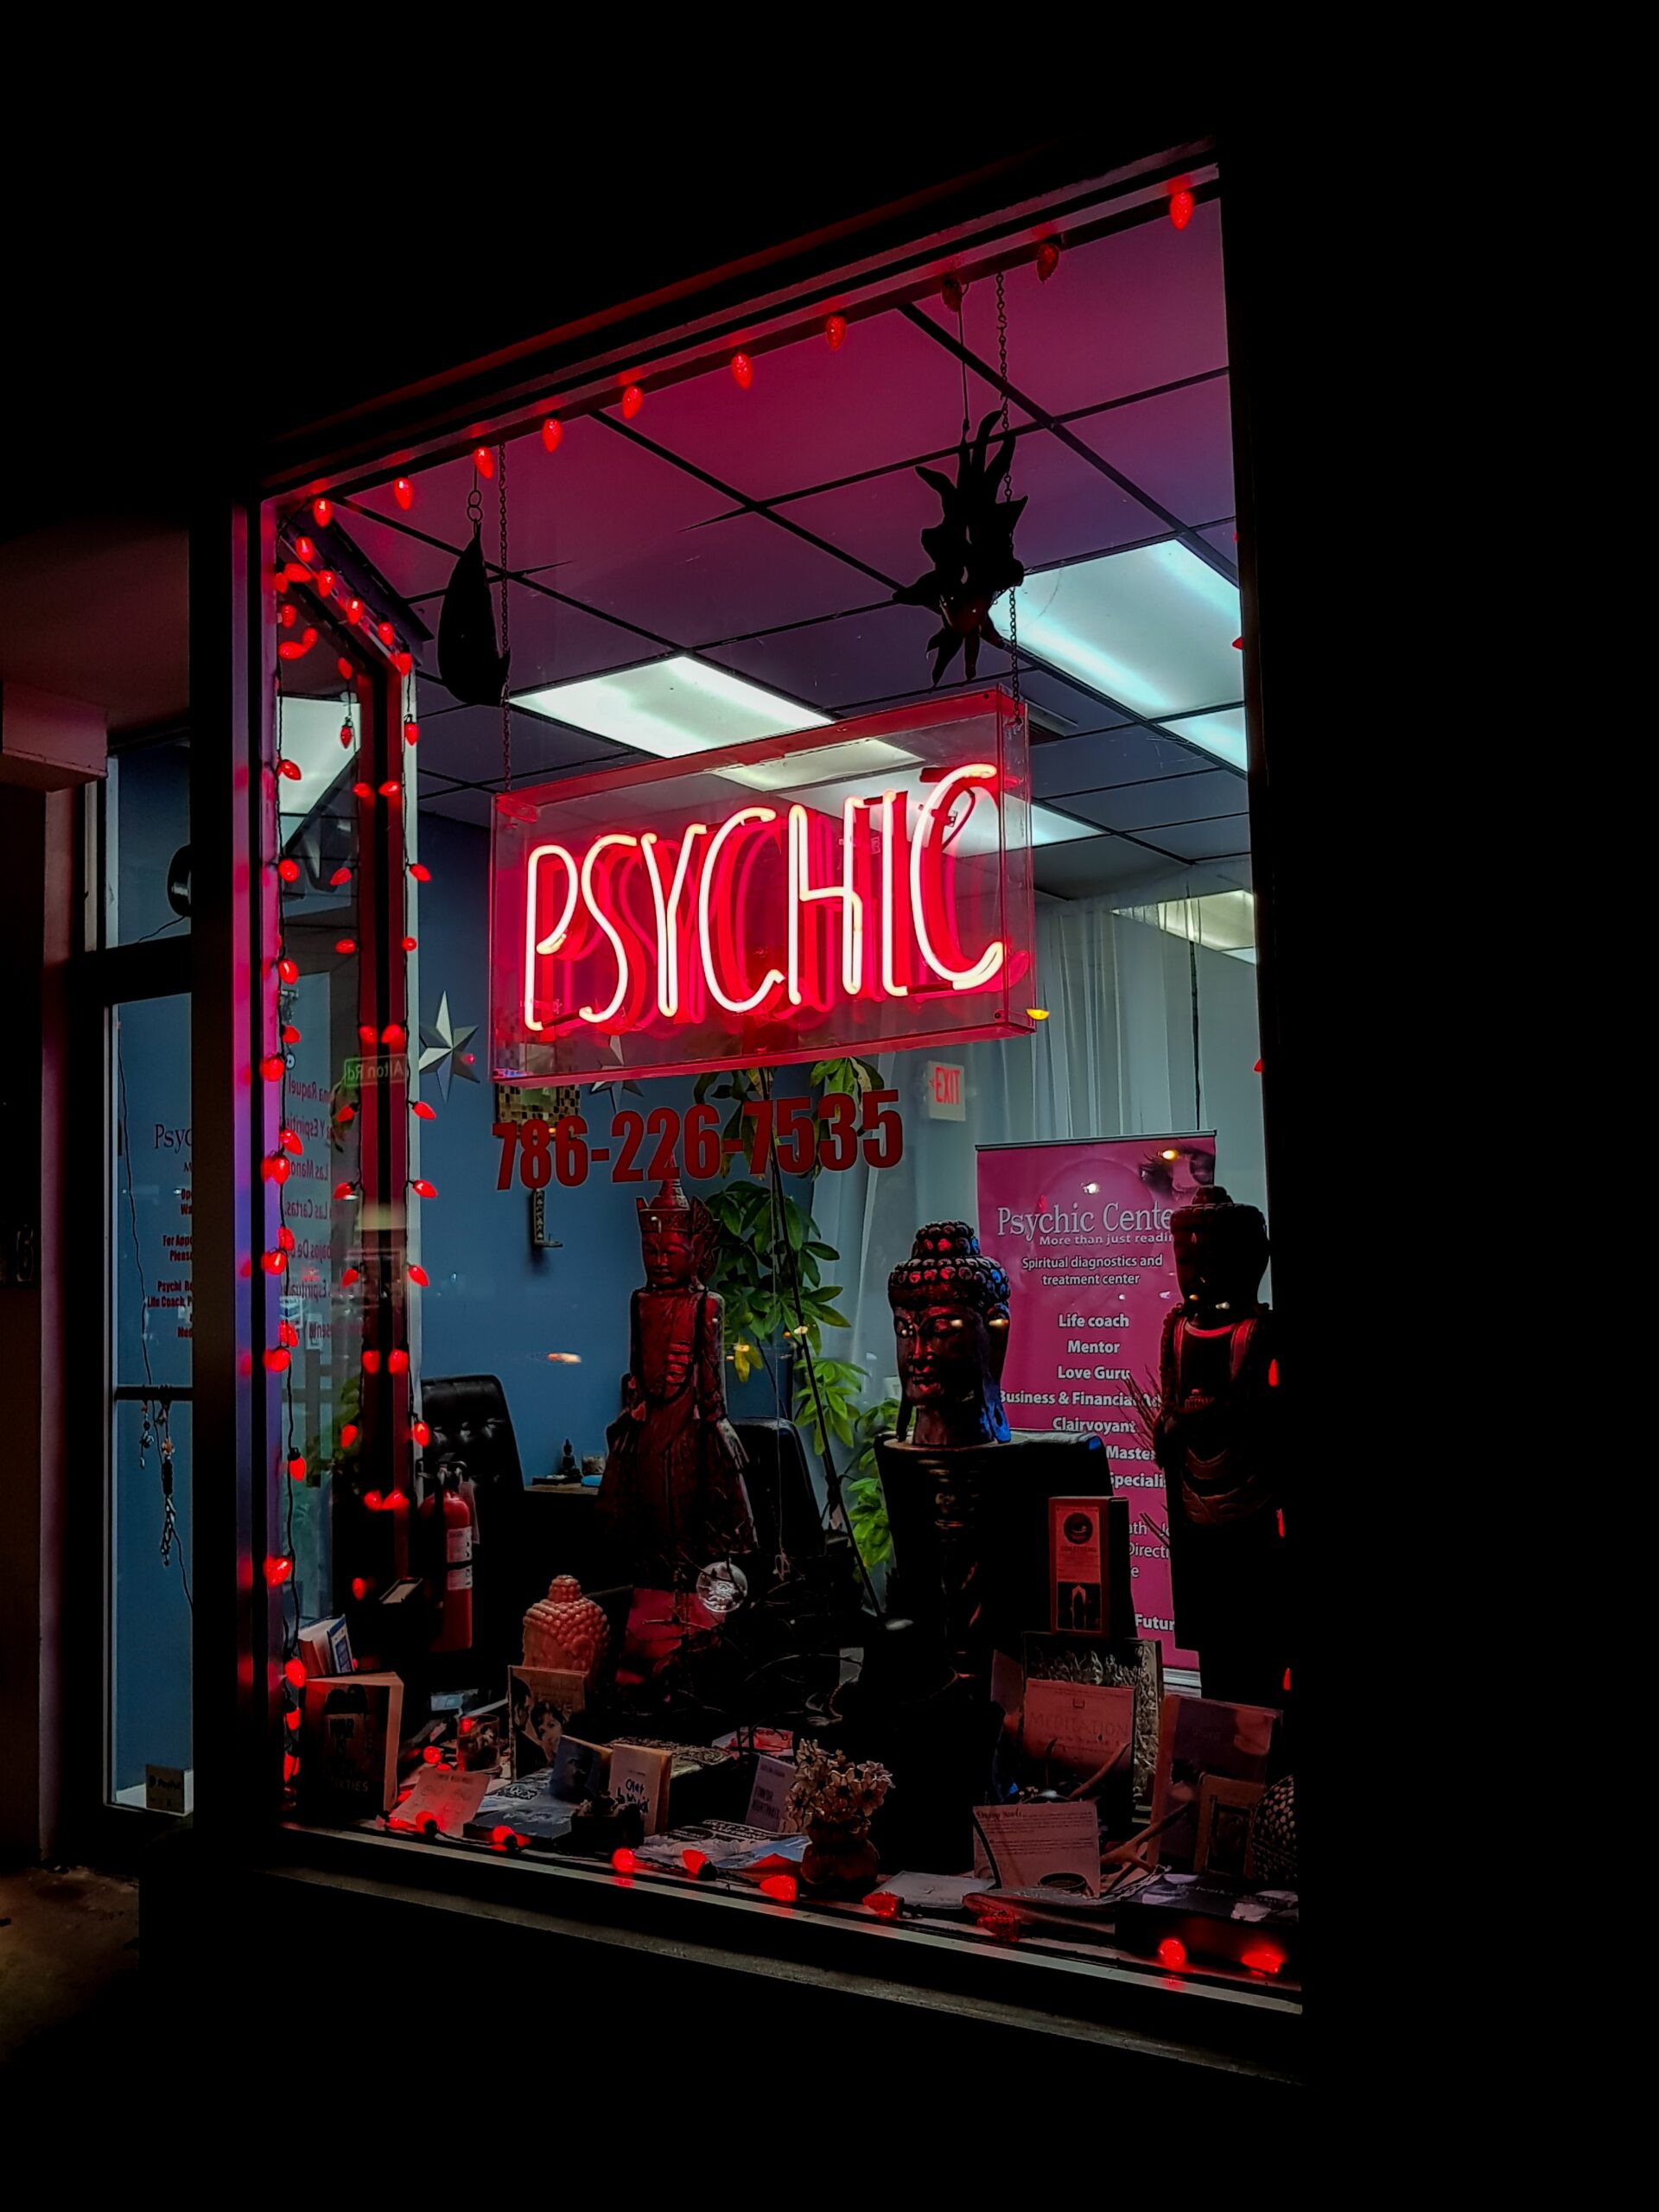 What does Psychic Reading mean and How to Distinguish the Myths from the Facts Associated with it?